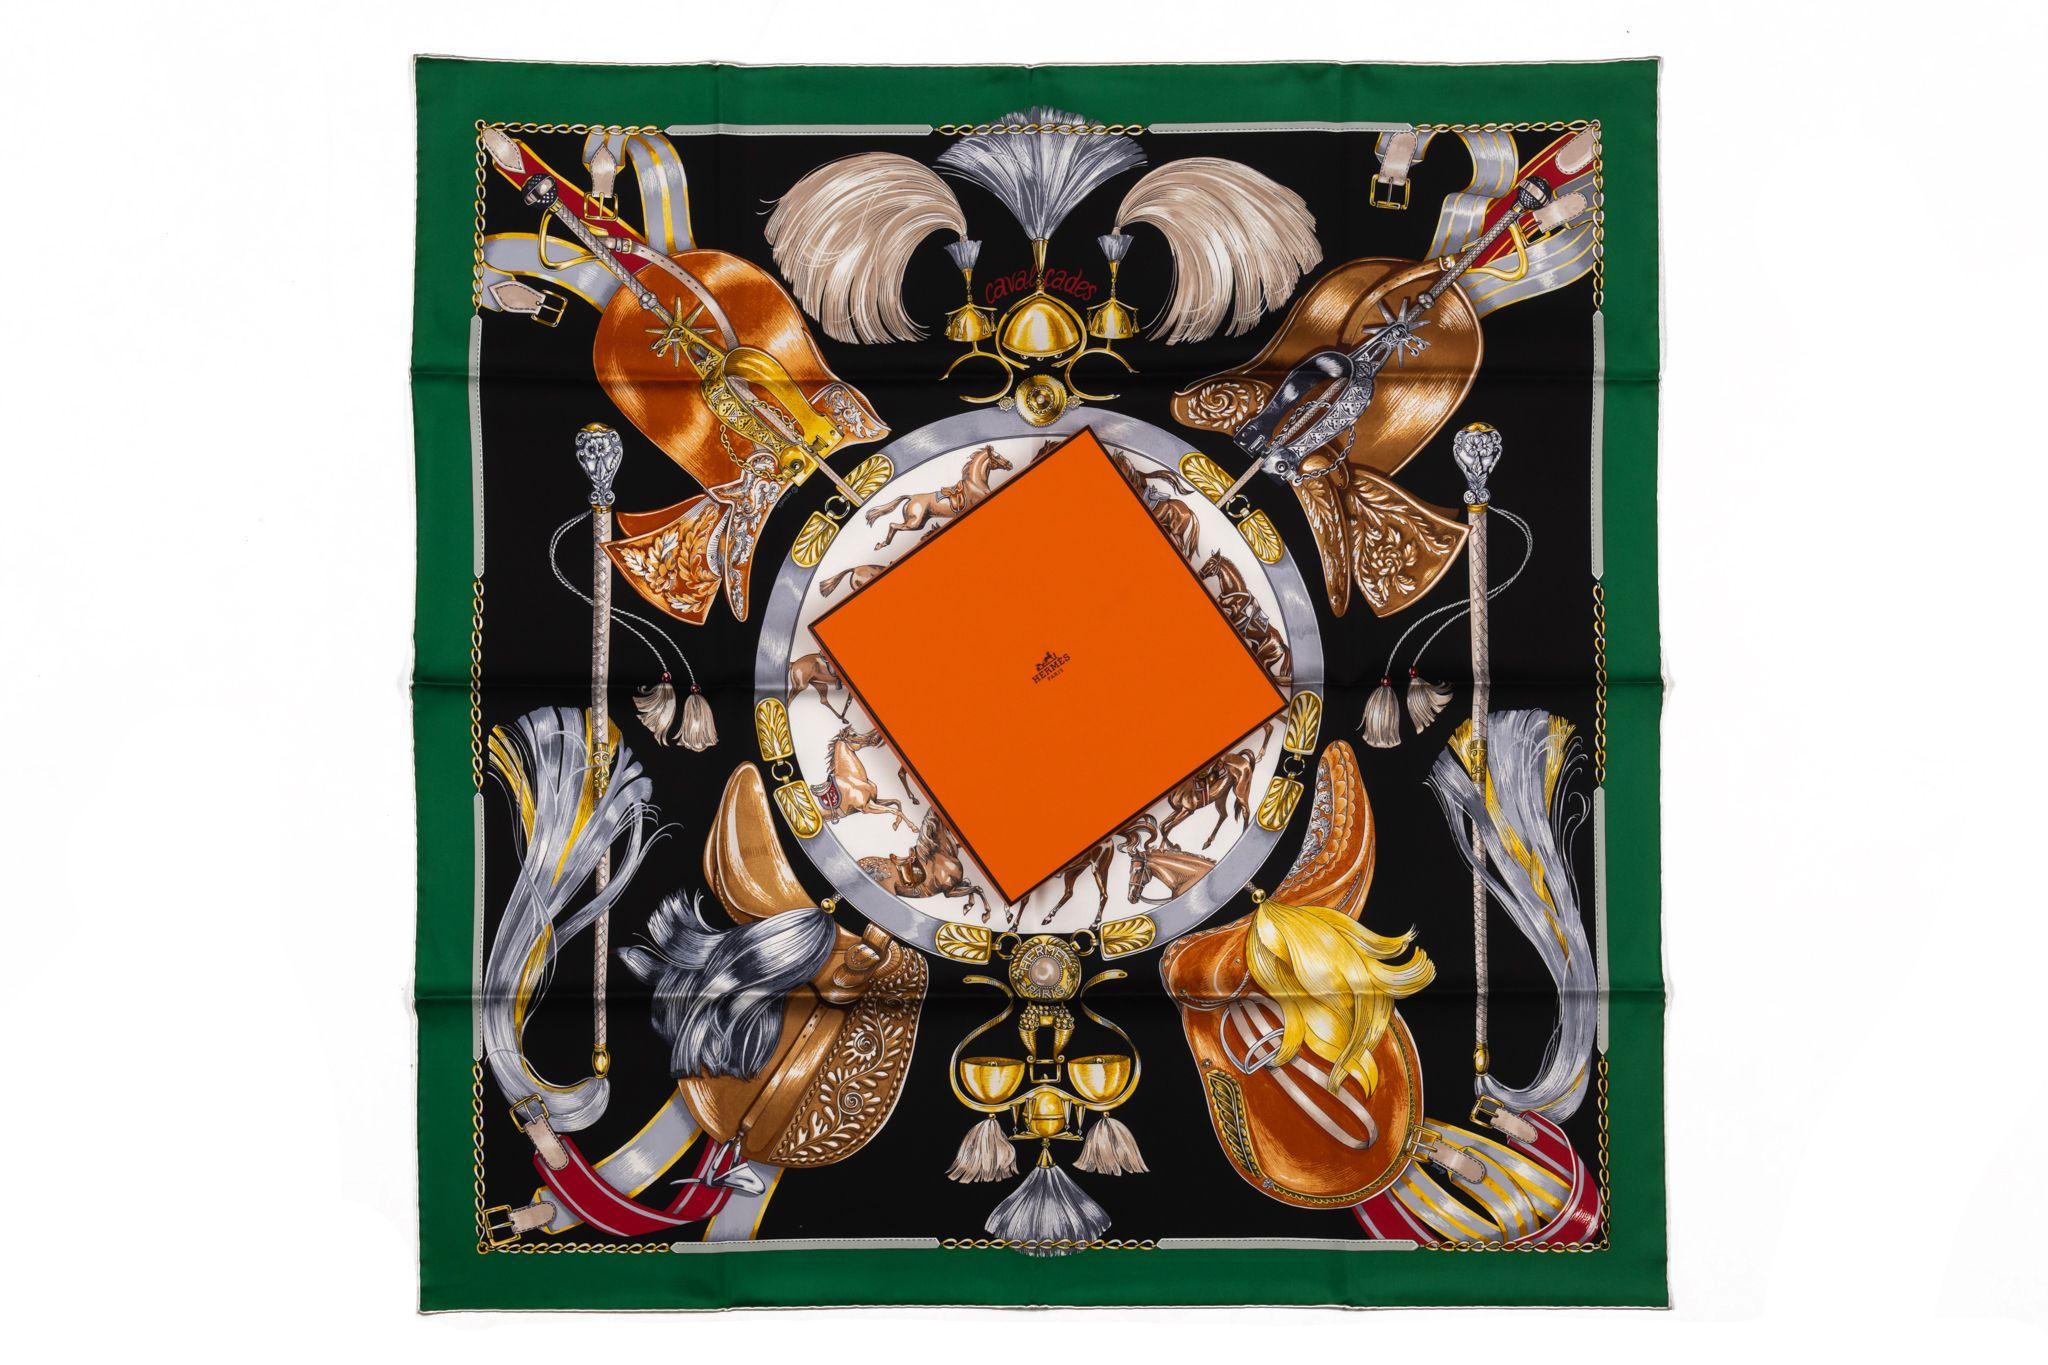 Hermes Carre Caval Cades Silk Scarf from the 2020 Spring Summer collection. The piece is new and comes in the original box.